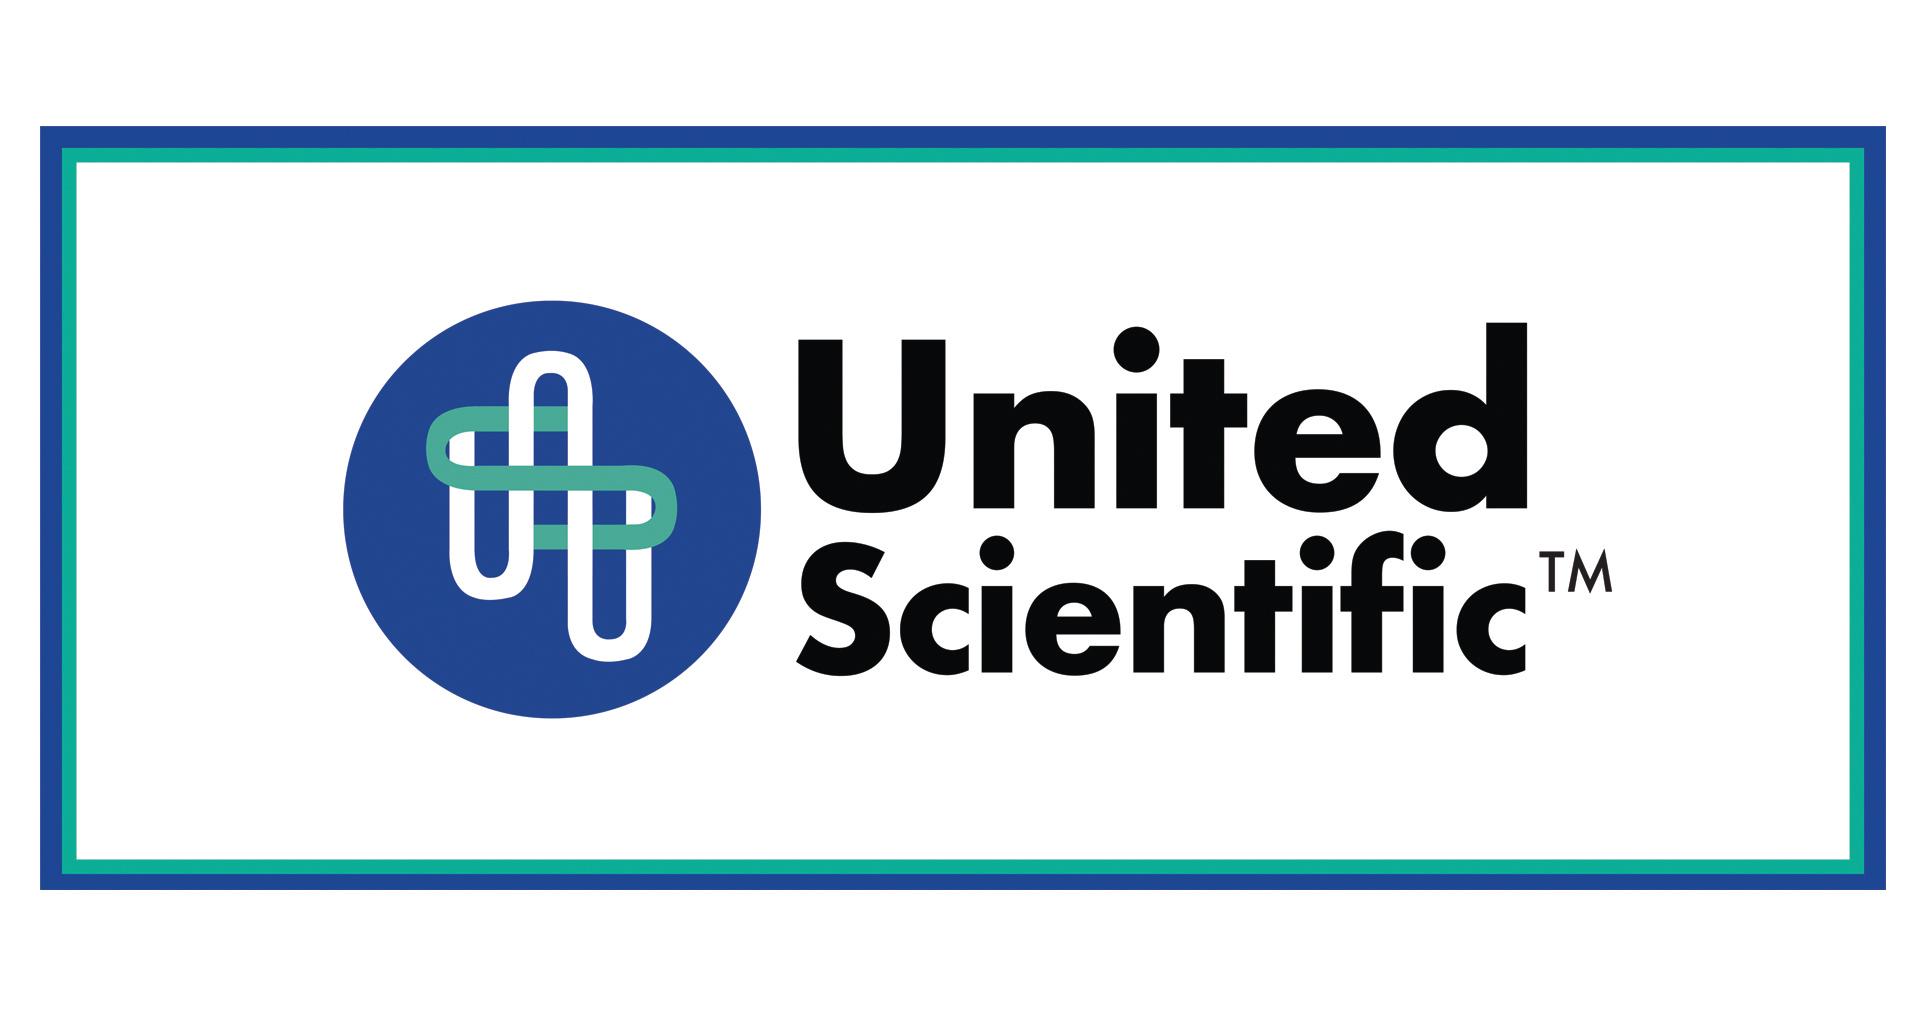 United Scientific has been serving teachers and educators since 1992.